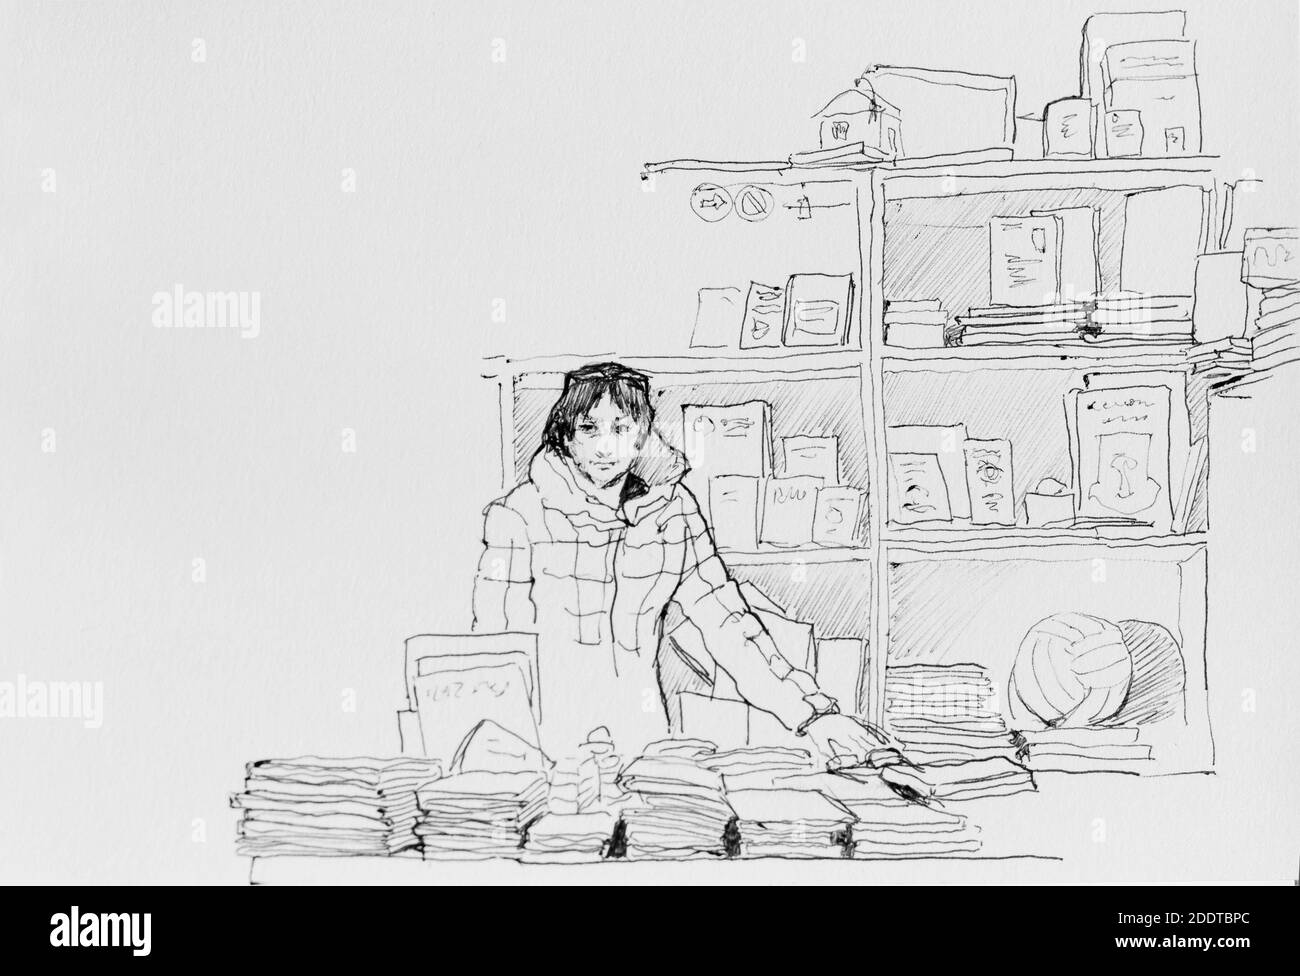 saleswoman in outdoor bookstore with books original pen illustration etching sketch Stock Photo